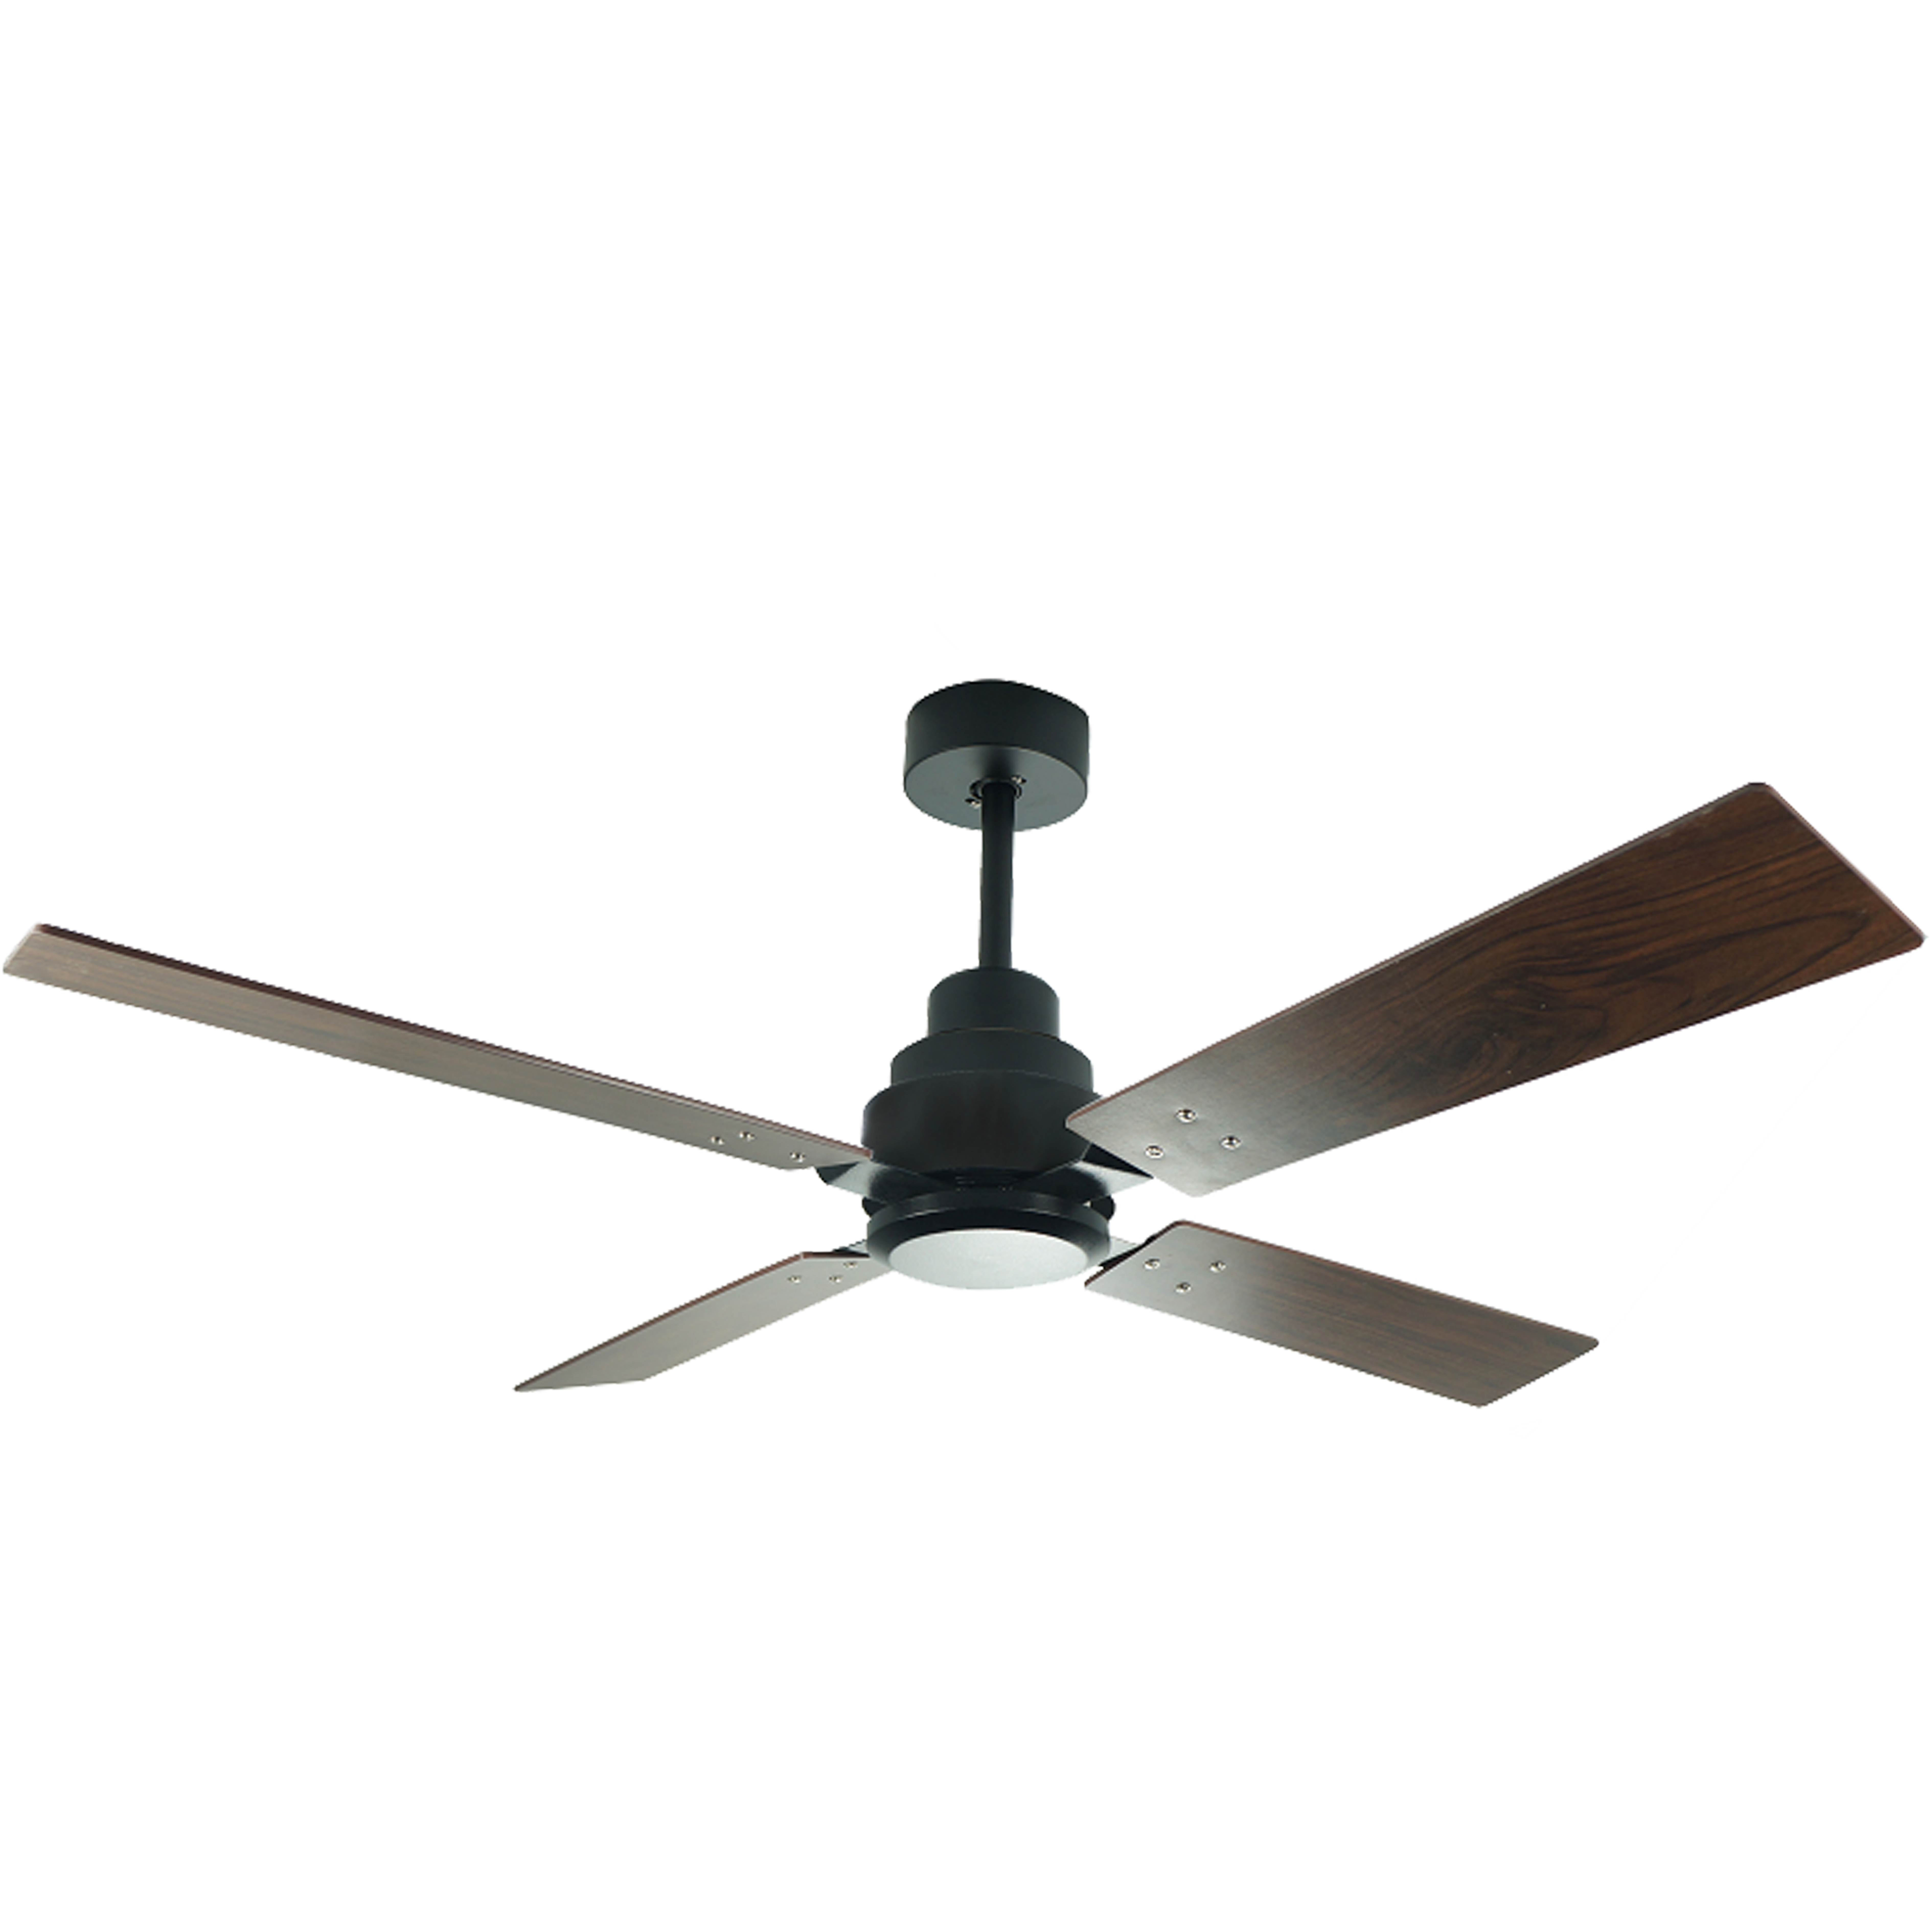 AirBena 52inch Plywood without Light DC Motor Ceiling Fan